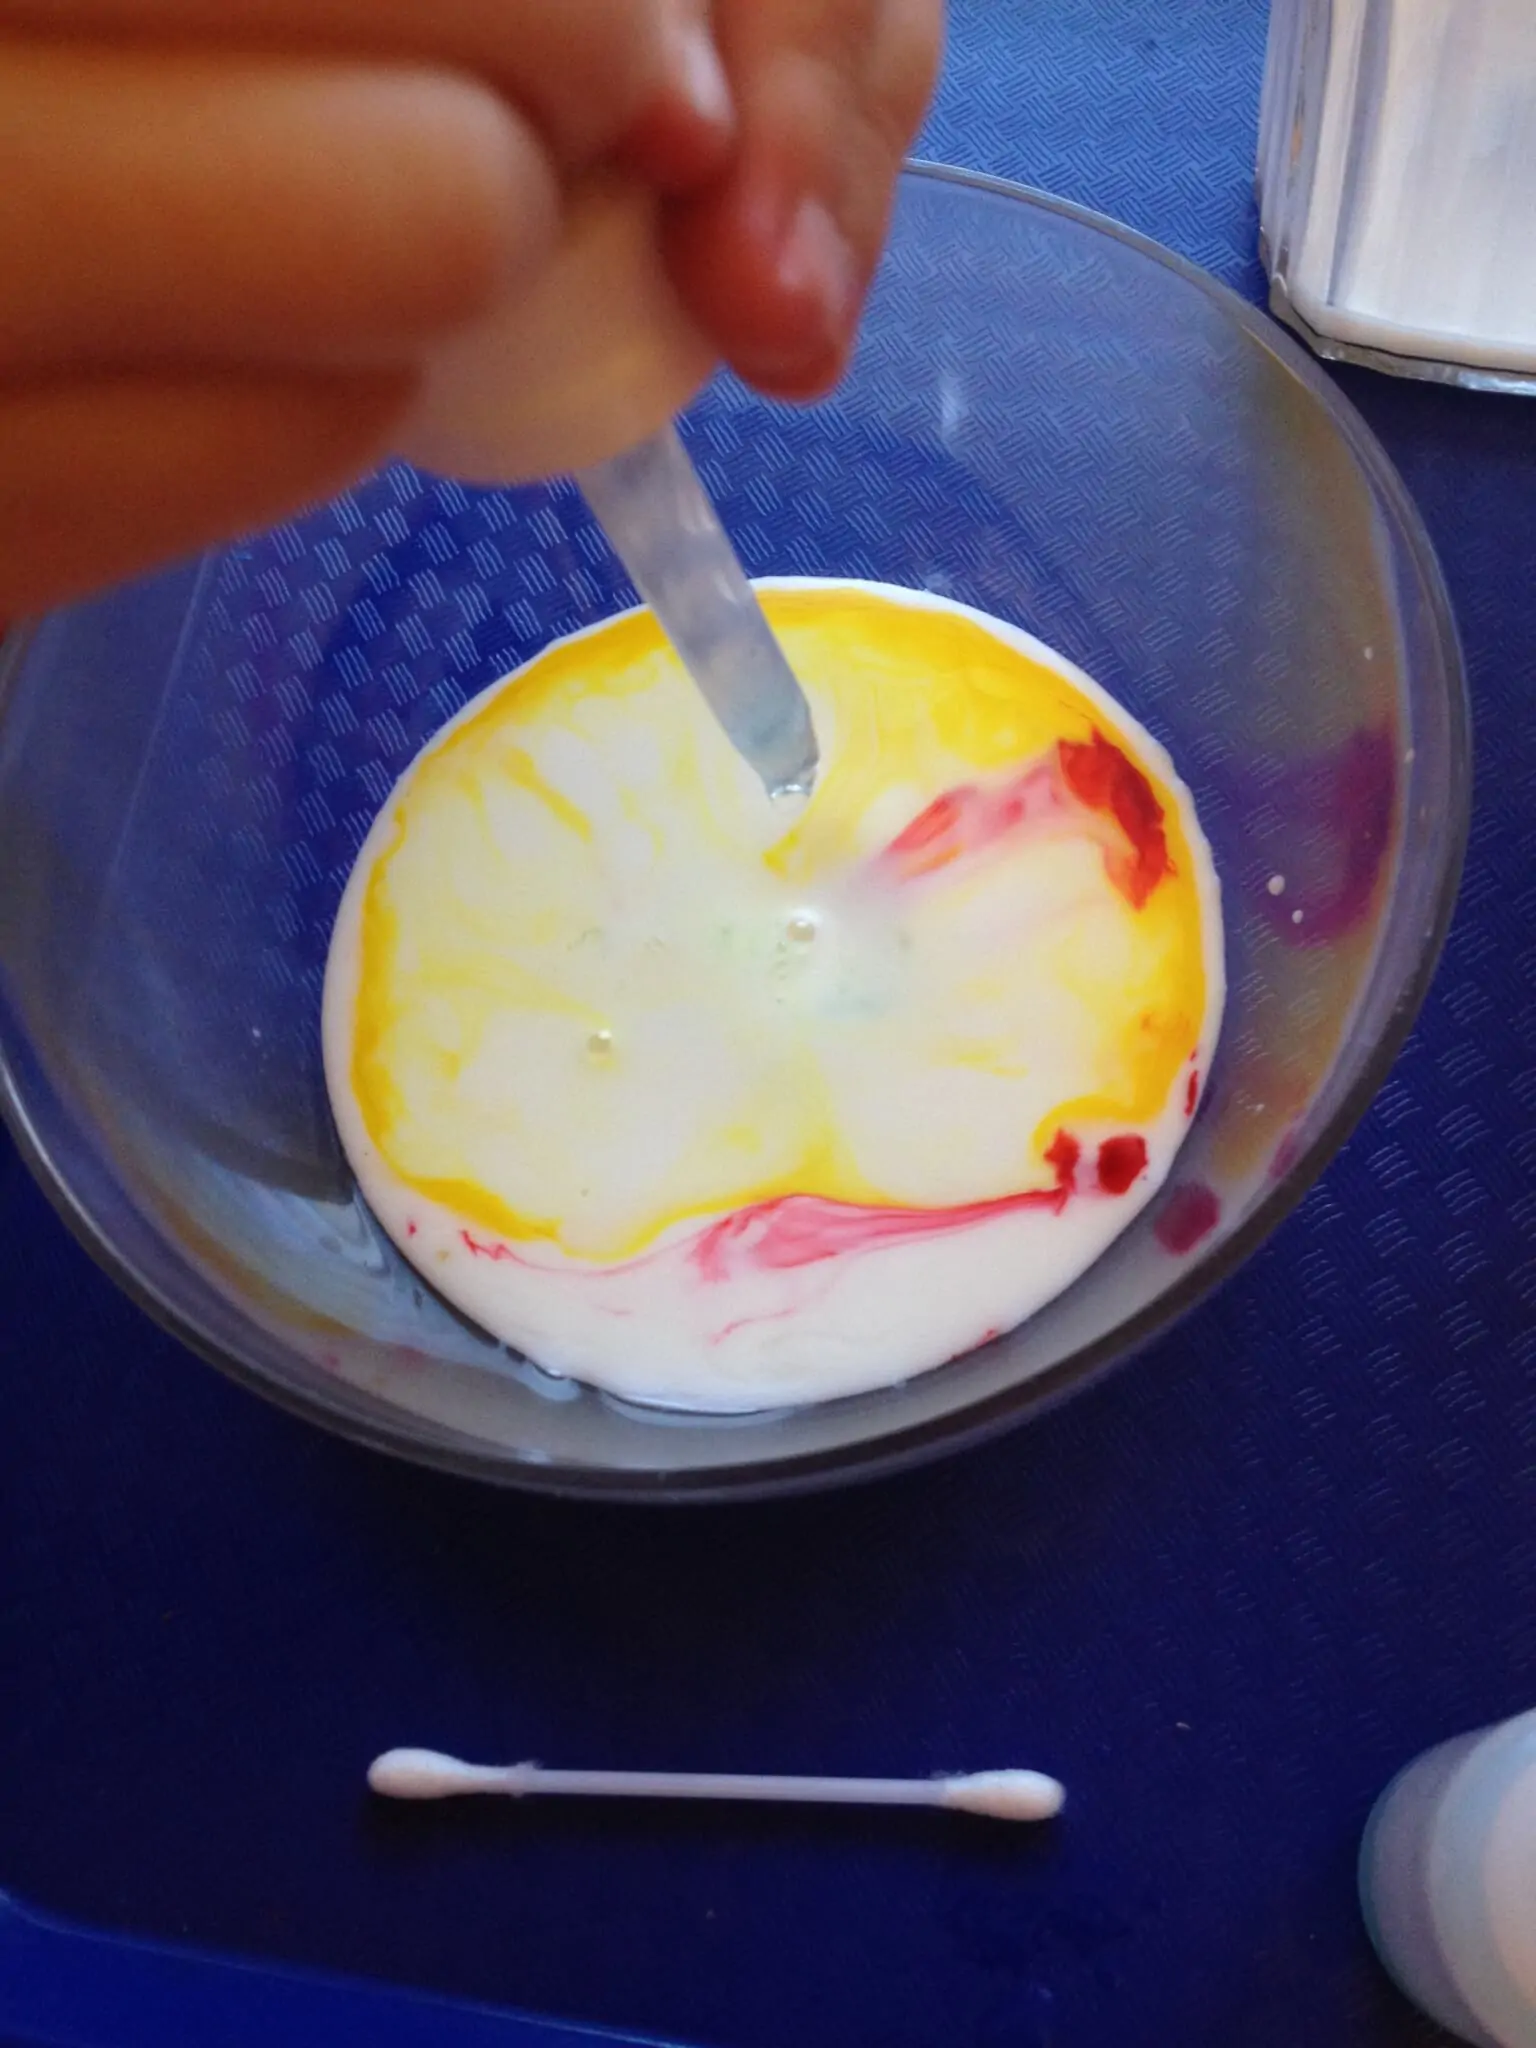 milk and dish soap experiment: really cool art meets science activity that engages fine motor skills